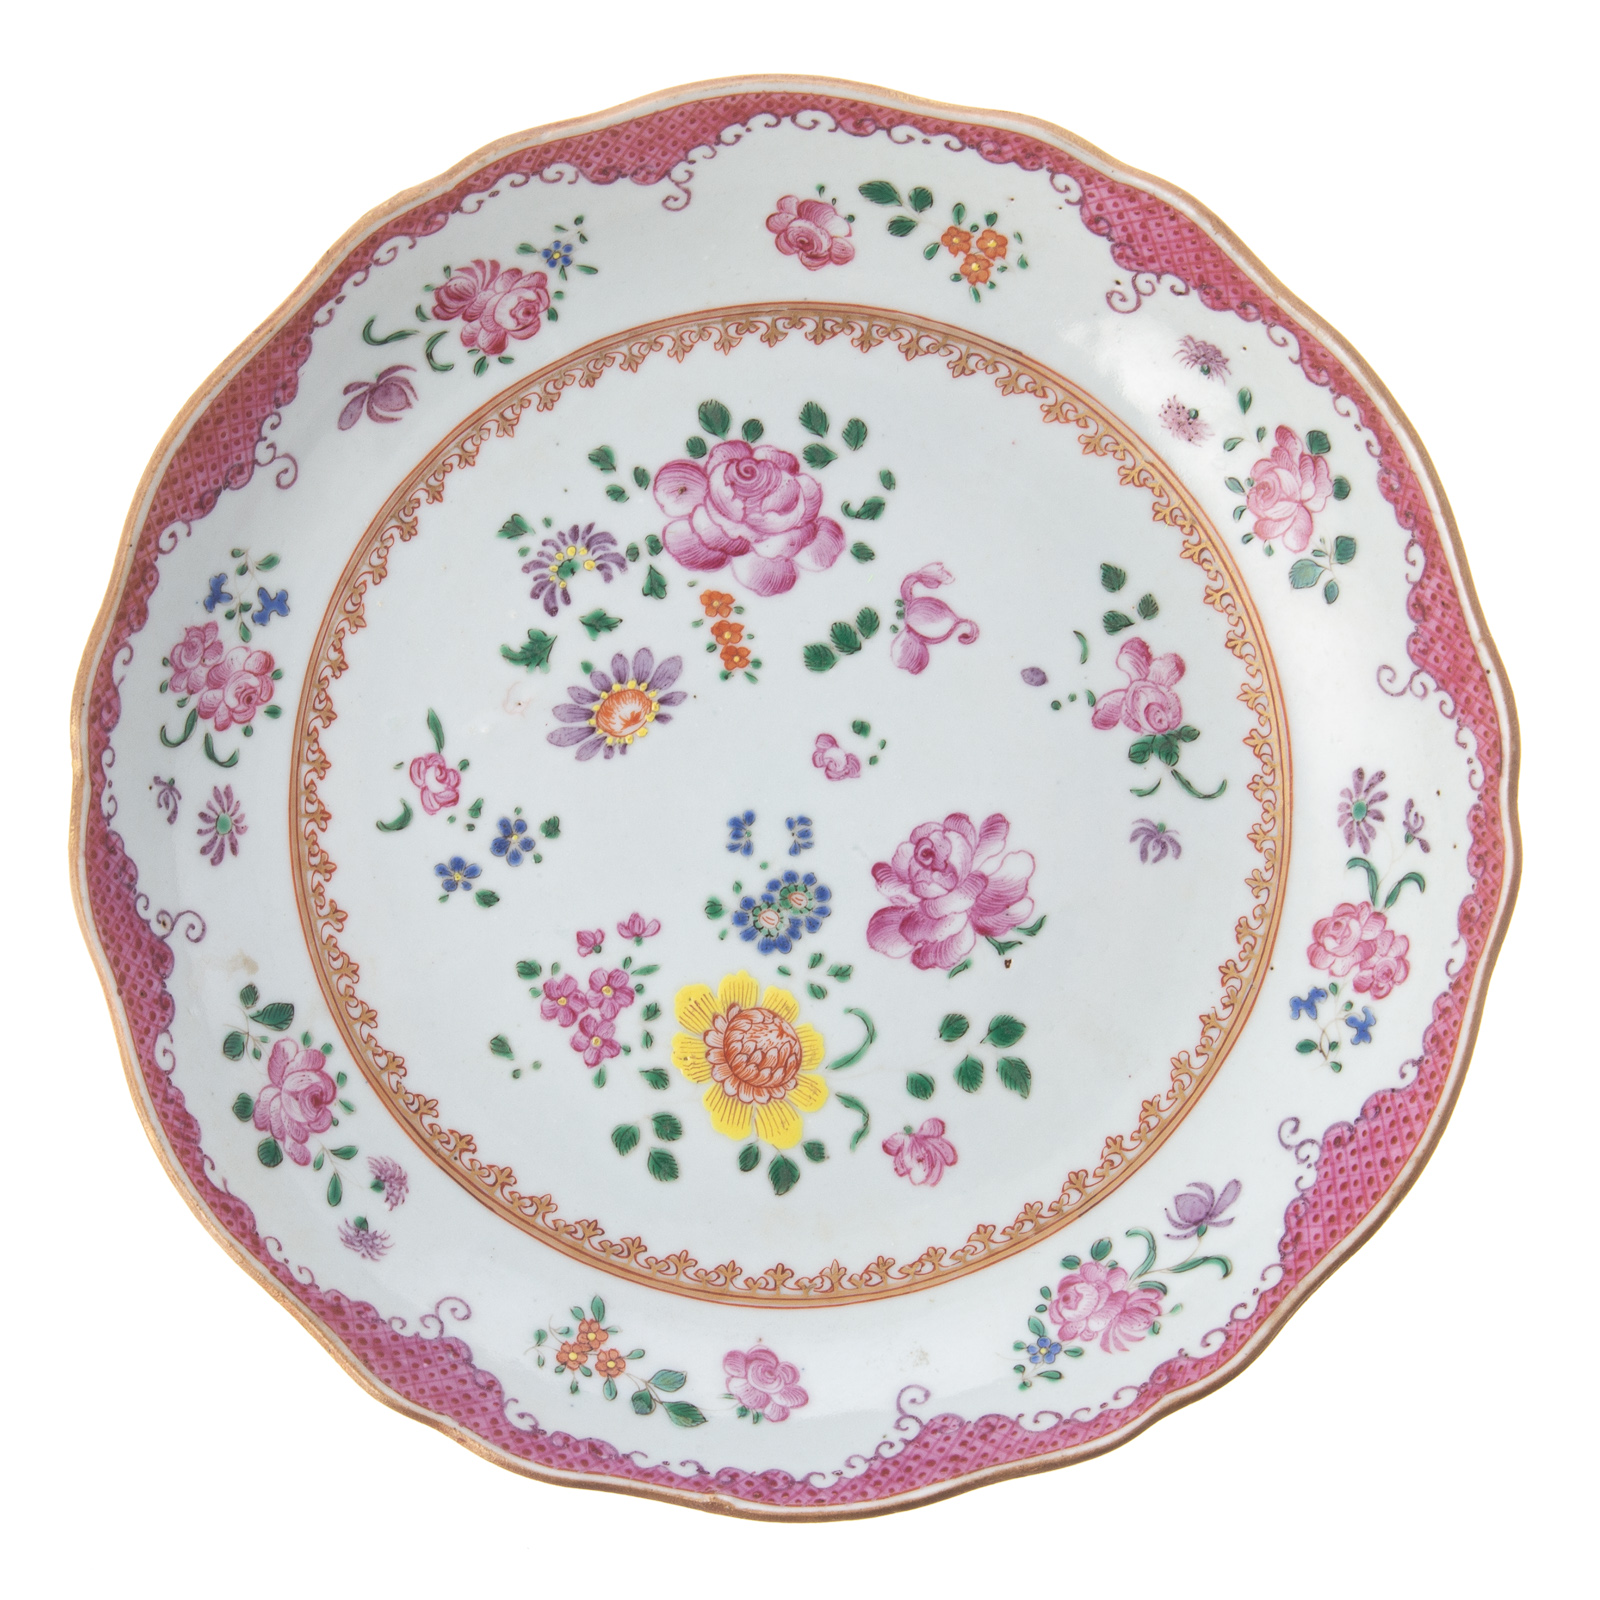 CHINESE EXPORT FAMILLE ROSE PLATE 2de995